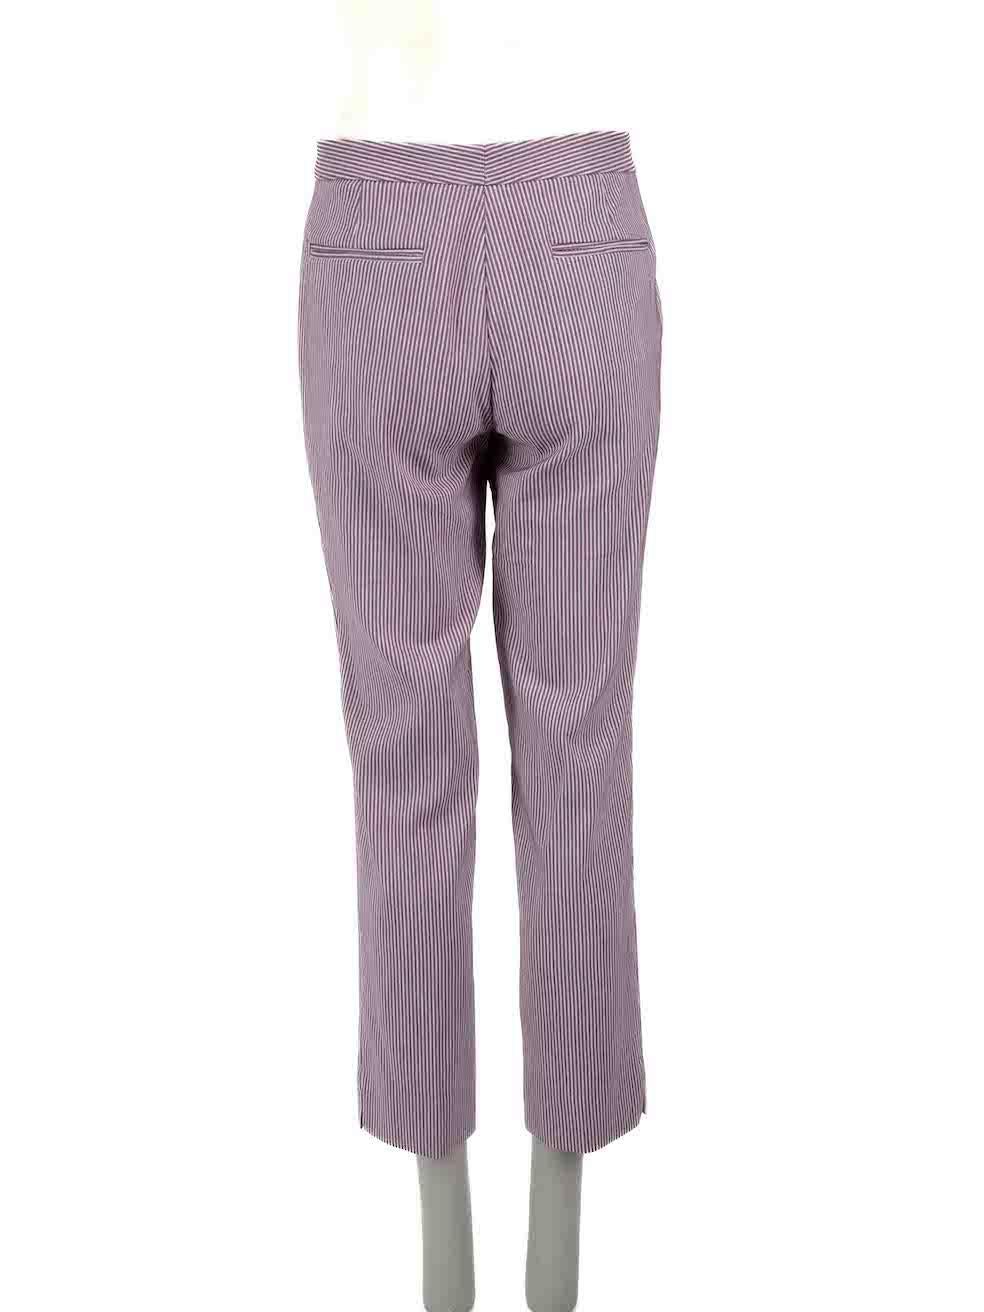 Etro Purple Striped Slim Fit Trousers Size M In Excellent Condition For Sale In London, GB